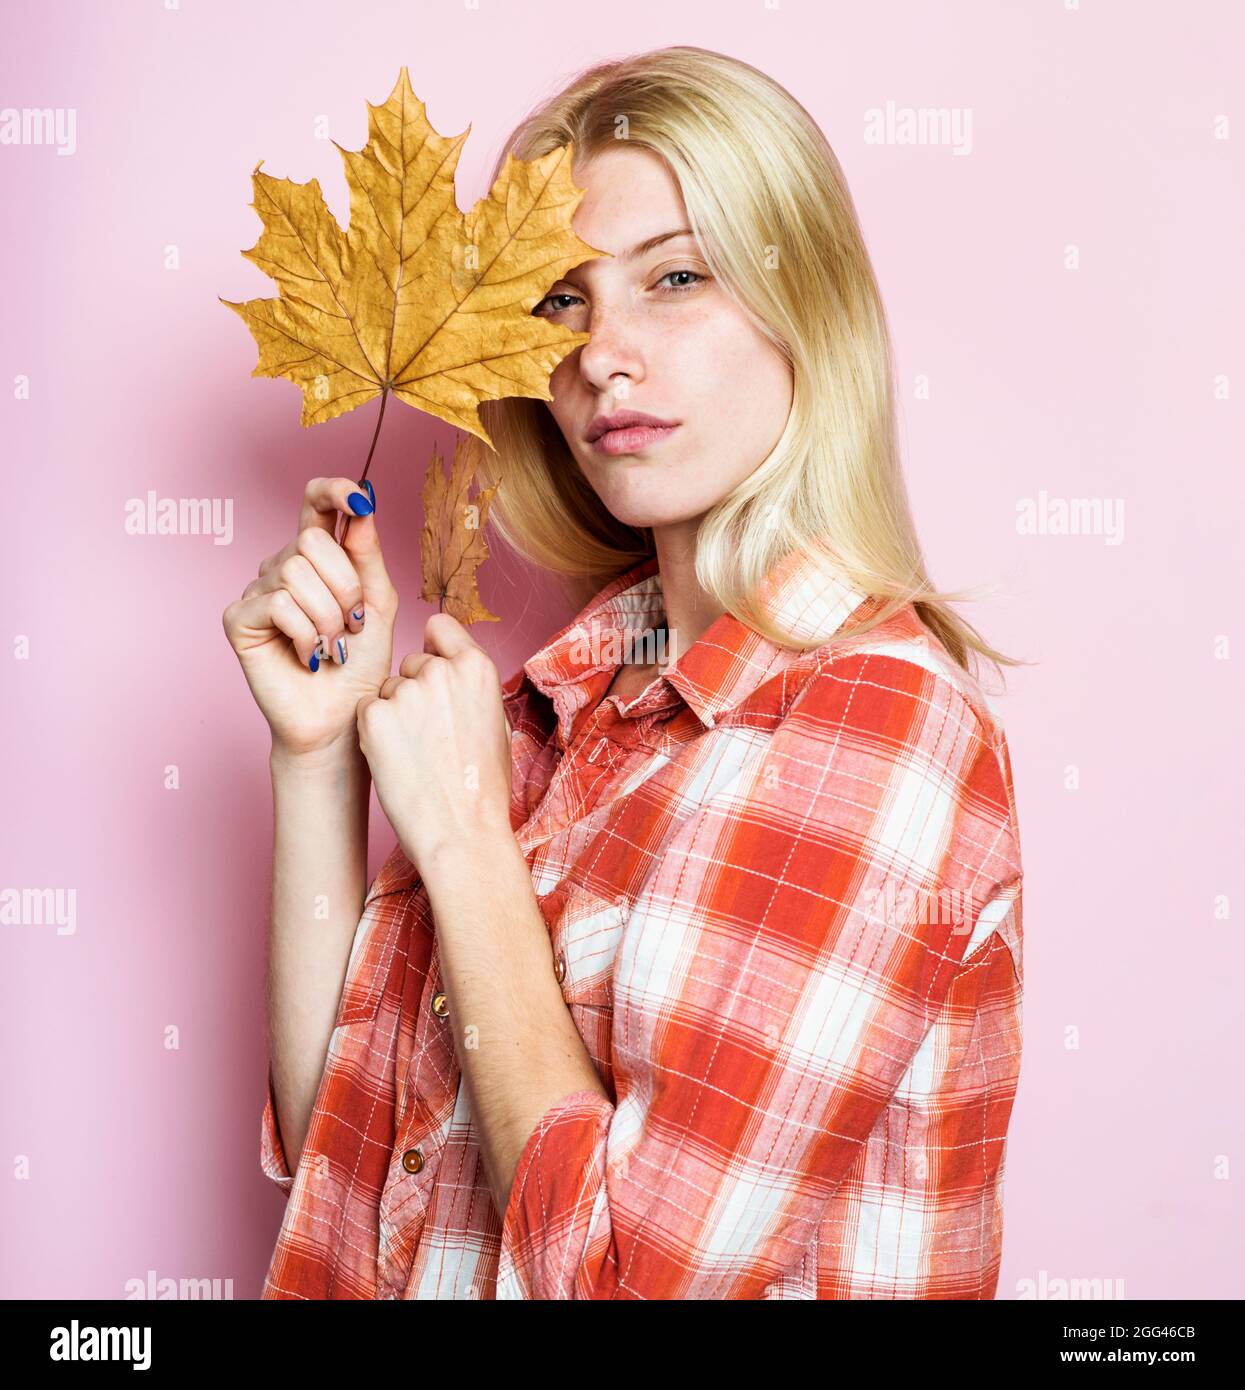 Autumn woman with yellow leaves. Fashion trends for fall. Blonde girl in casual wear with golden leaf. Autumnal mood. Stock Photo